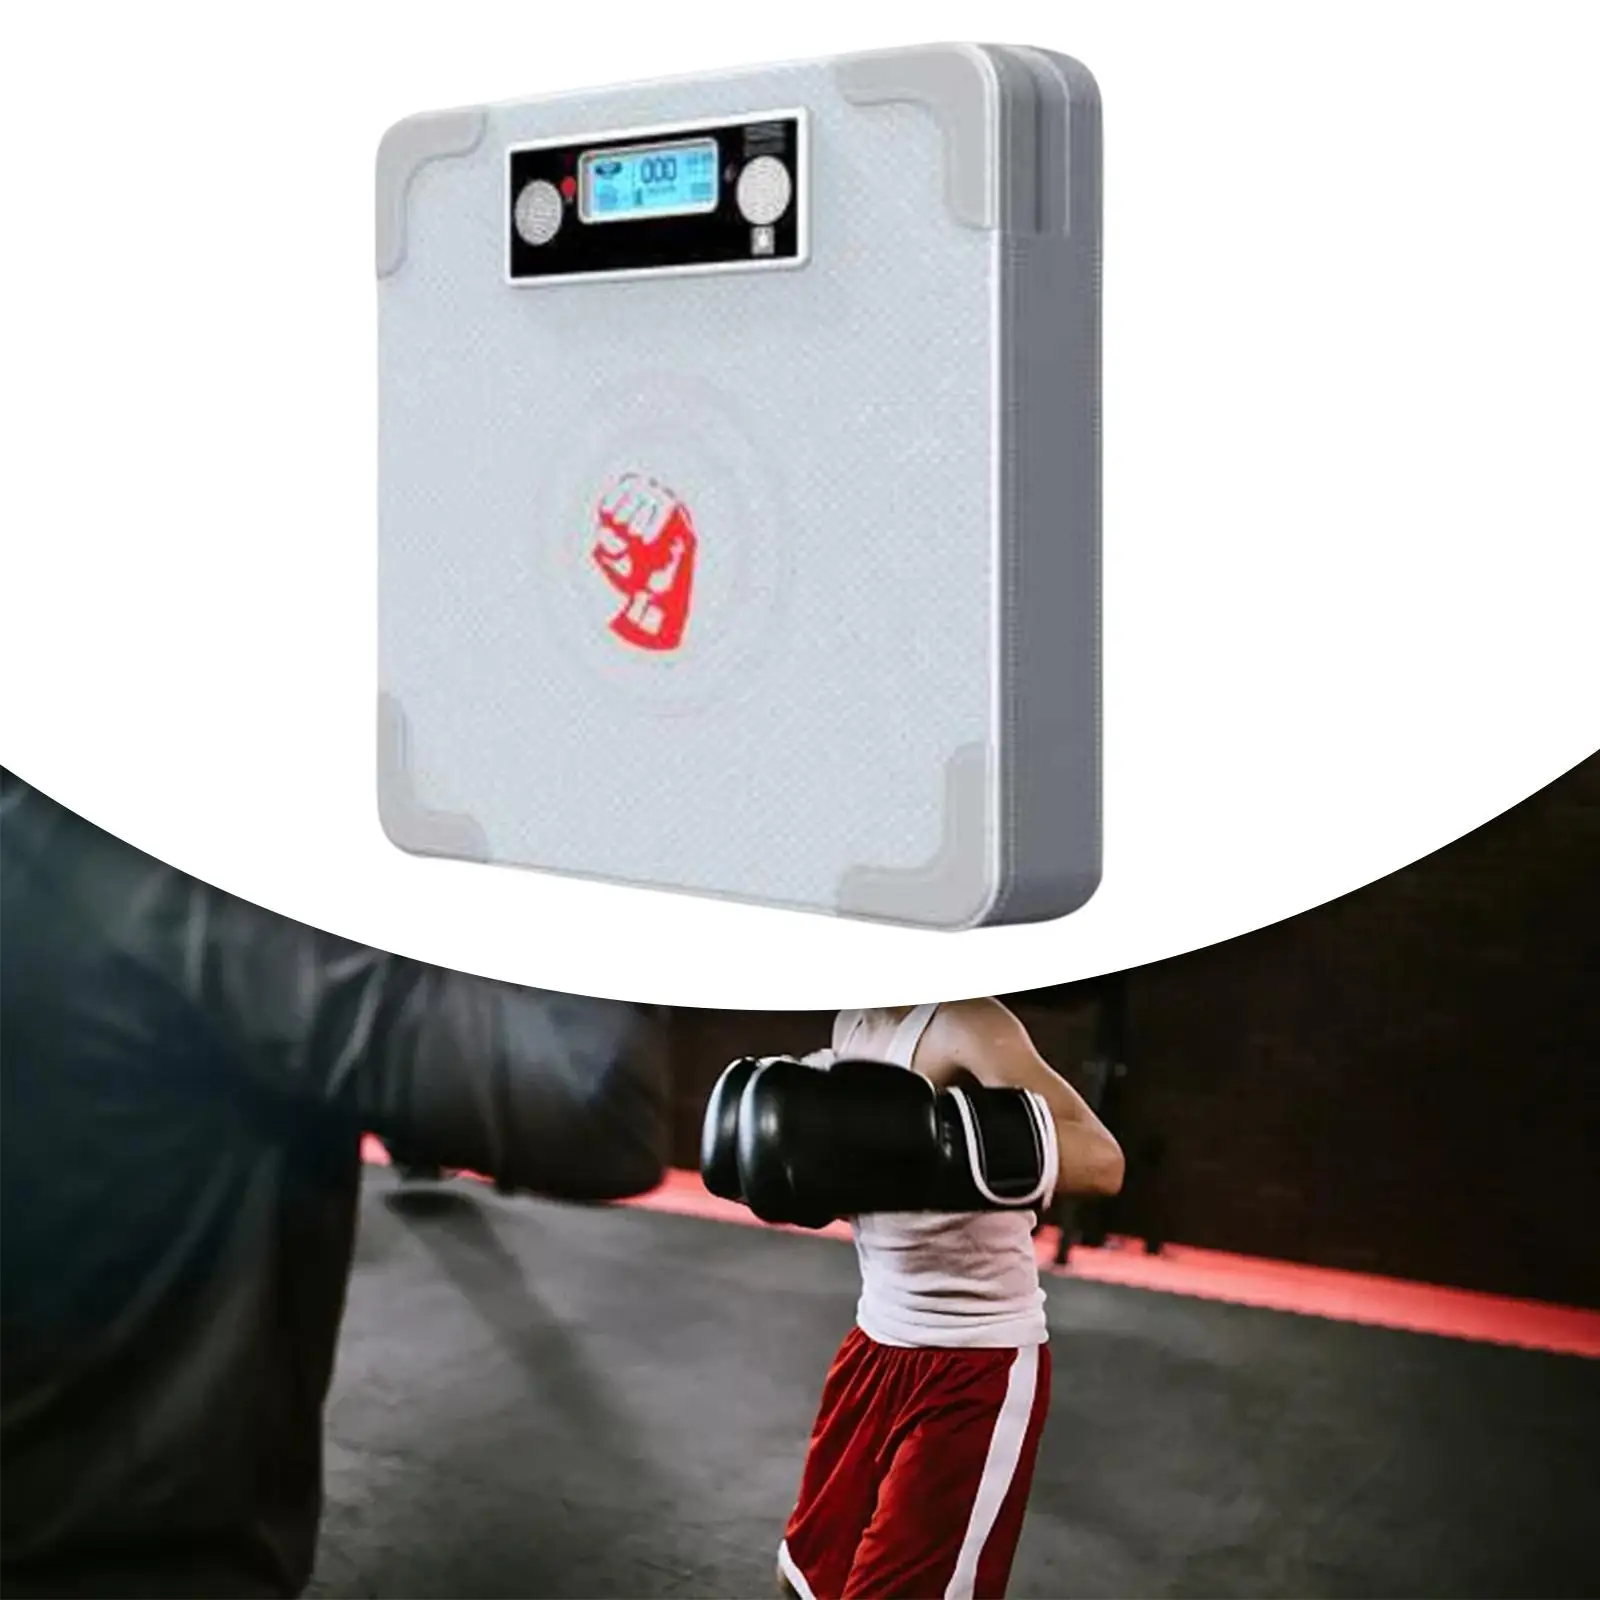 PU Boxing Sandbag Force Tester Boxing Training Equipment Boxing Bags Wall Target Wall Mounted for Youth Adults Kids Fitness